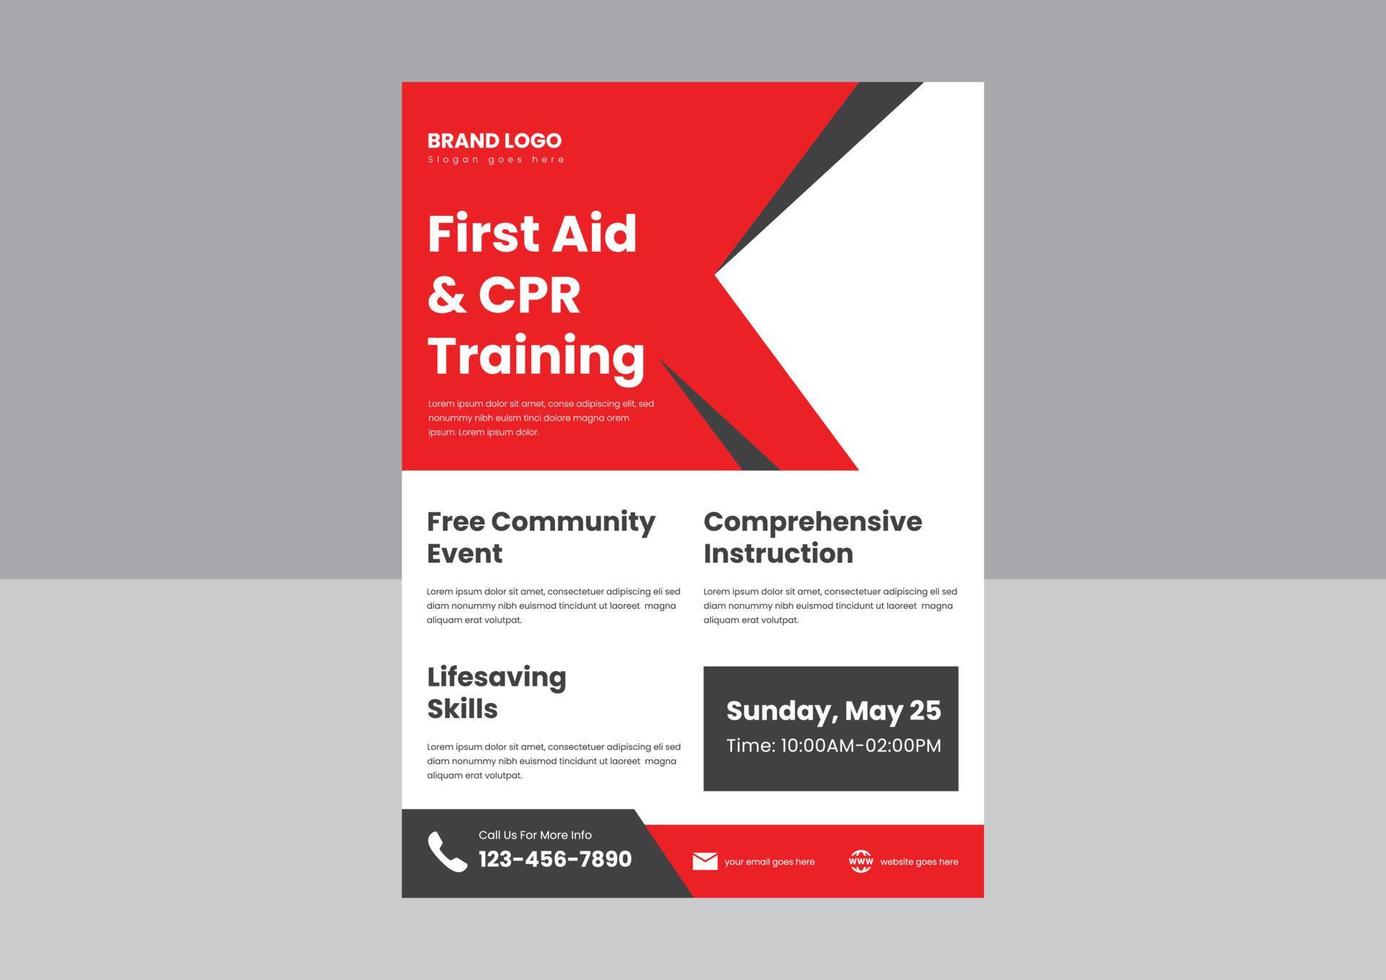 CPR and first aid training flyer poster template. CPR training course flyer poster design. first aid adult CPR training flyer design. vector